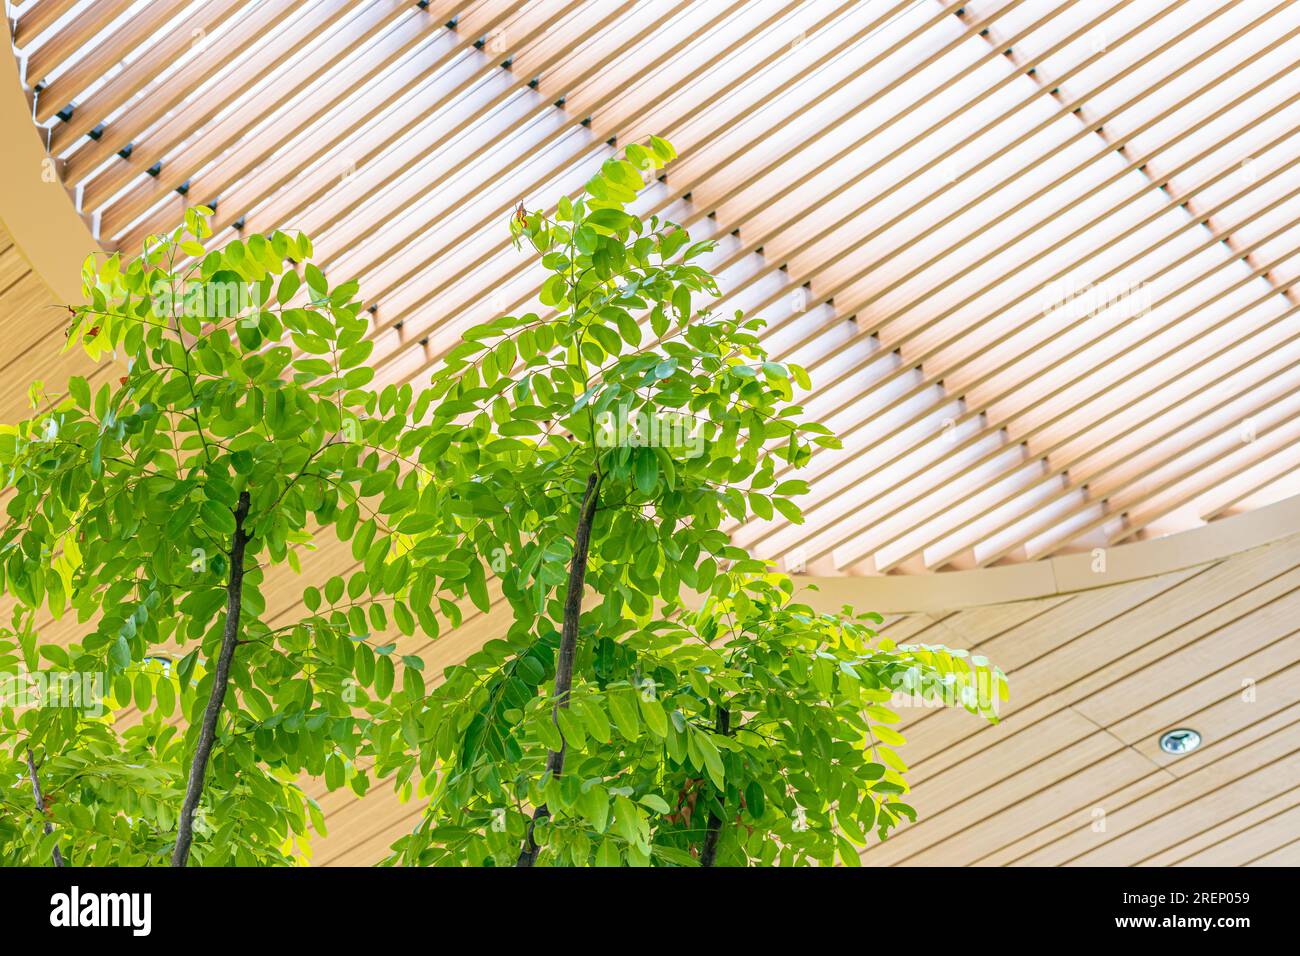 interior public space area with roof sunshade canopy grill design for green tree plant indoor for cooling air refresh ozone Stock Photo